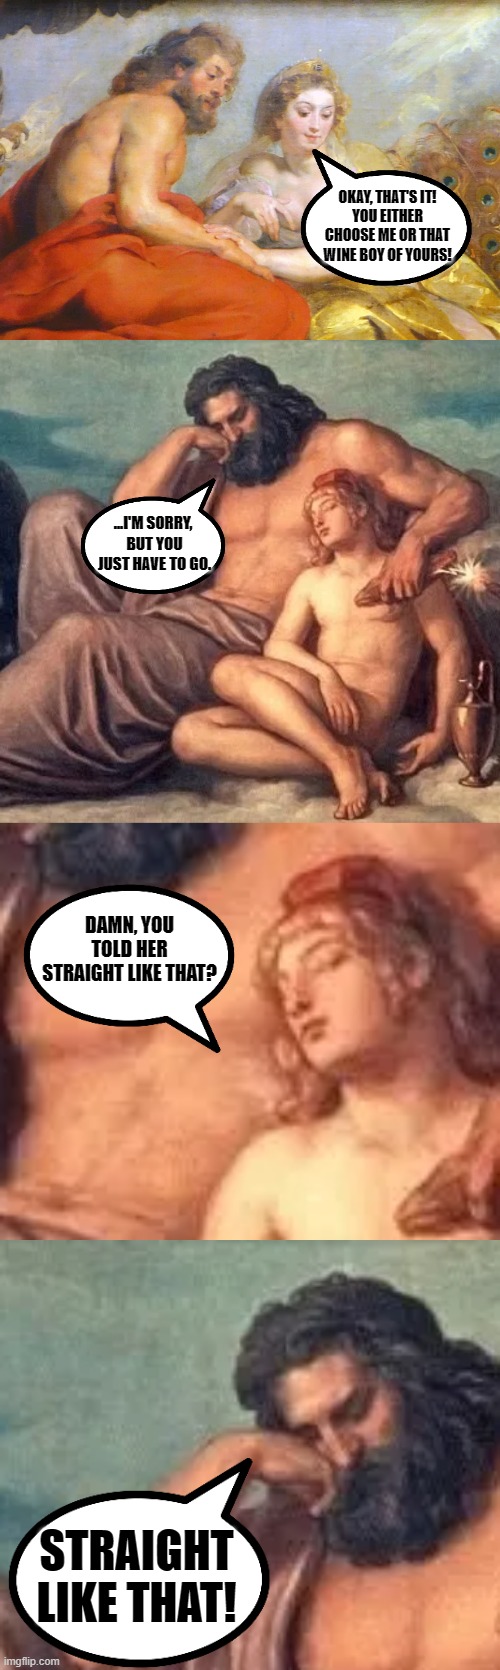 Damn. | OKAY, THAT'S IT!
YOU EITHER CHOOSE ME OR THAT WINE BOY OF YOURS! ...I'M SORRY, 
BUT YOU JUST HAVE TO GO. DAMN, YOU TOLD HER STRAIGHT LIKE THAT? STRAIGHT LIKE THAT! | image tagged in zeus,hera,ganymede,greek mythology,funny,lgbtq | made w/ Imgflip meme maker